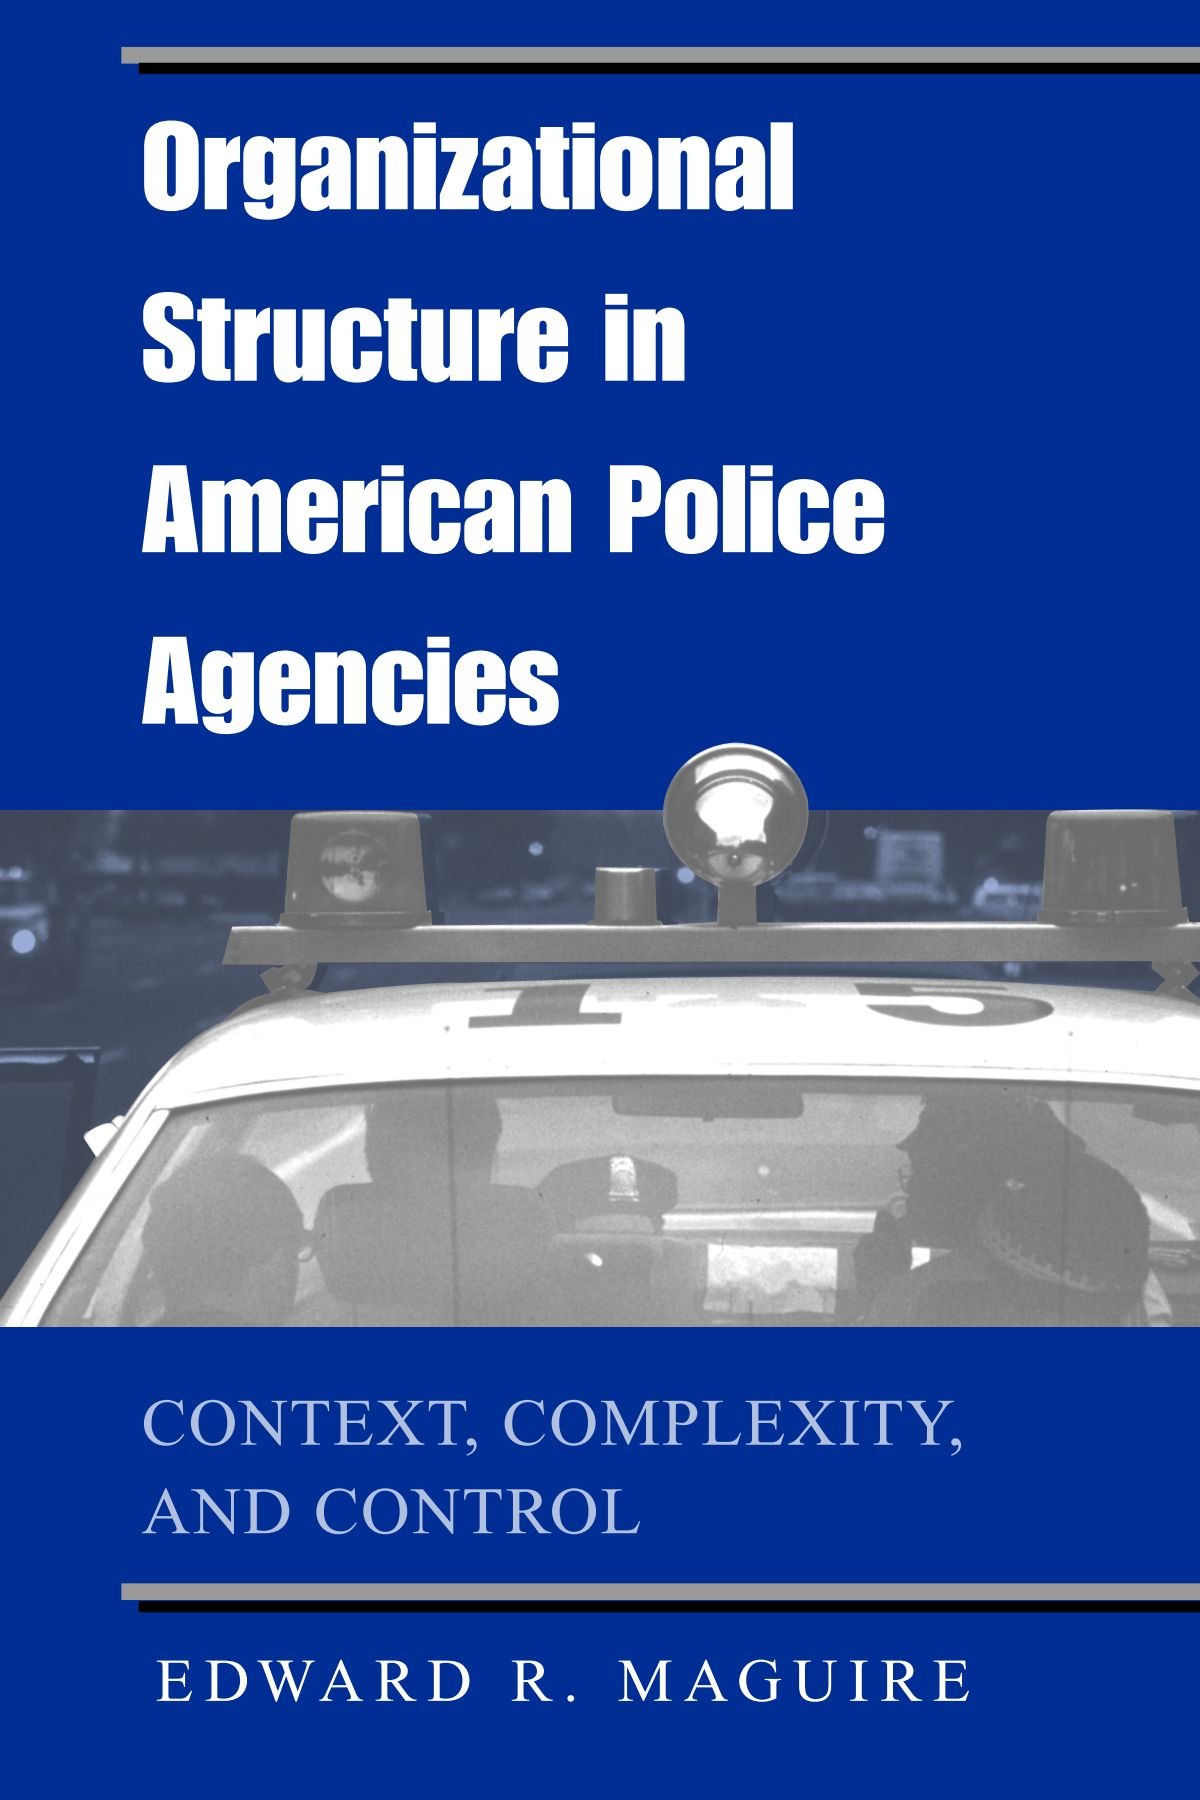 Book cover - Organizational Structure in American Police Agencies: Context, Complexity, and Control